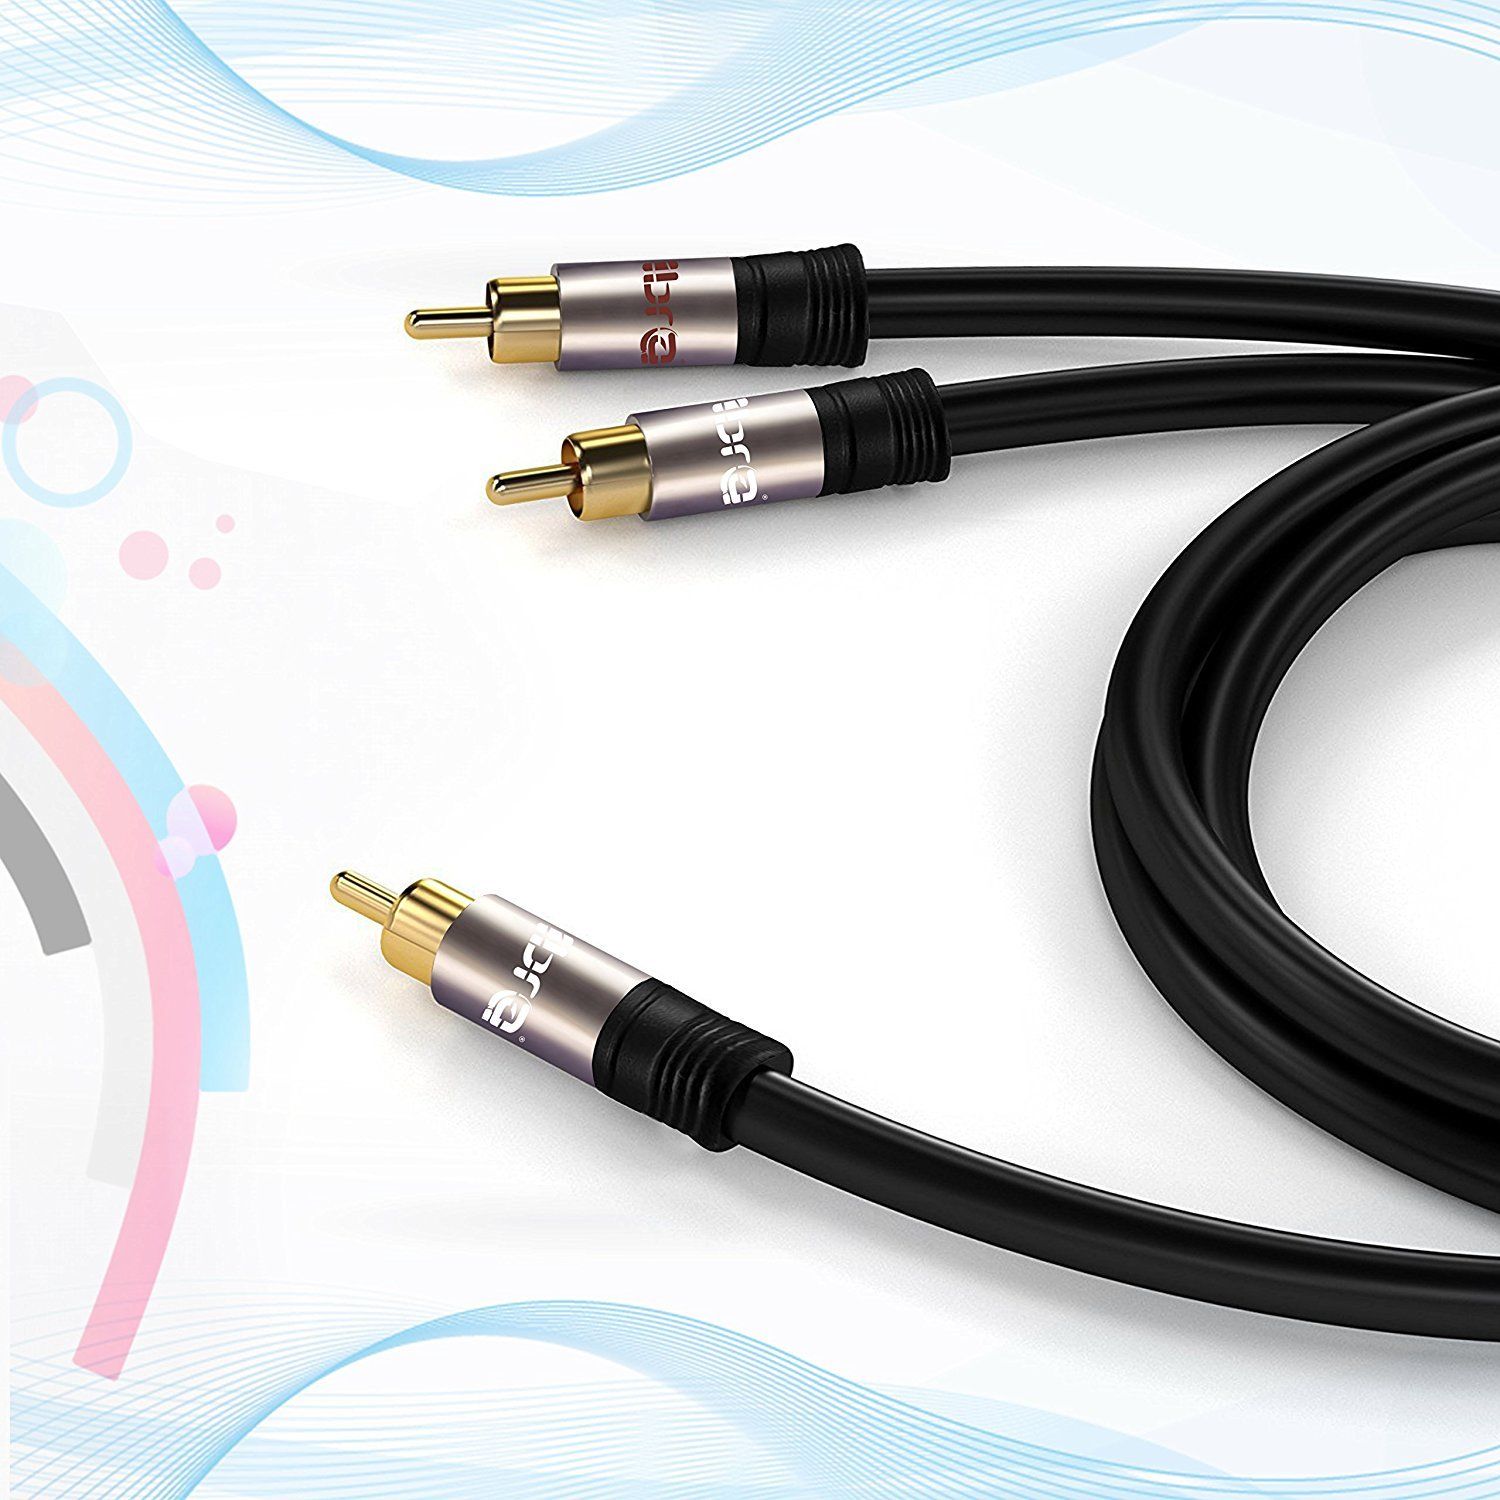 IBRA 7.5M Y Cable / Subwoofer Cable / Audio Cable / RCA Cable (1 x RCA to 2 x RCA) - GUN Metal Range